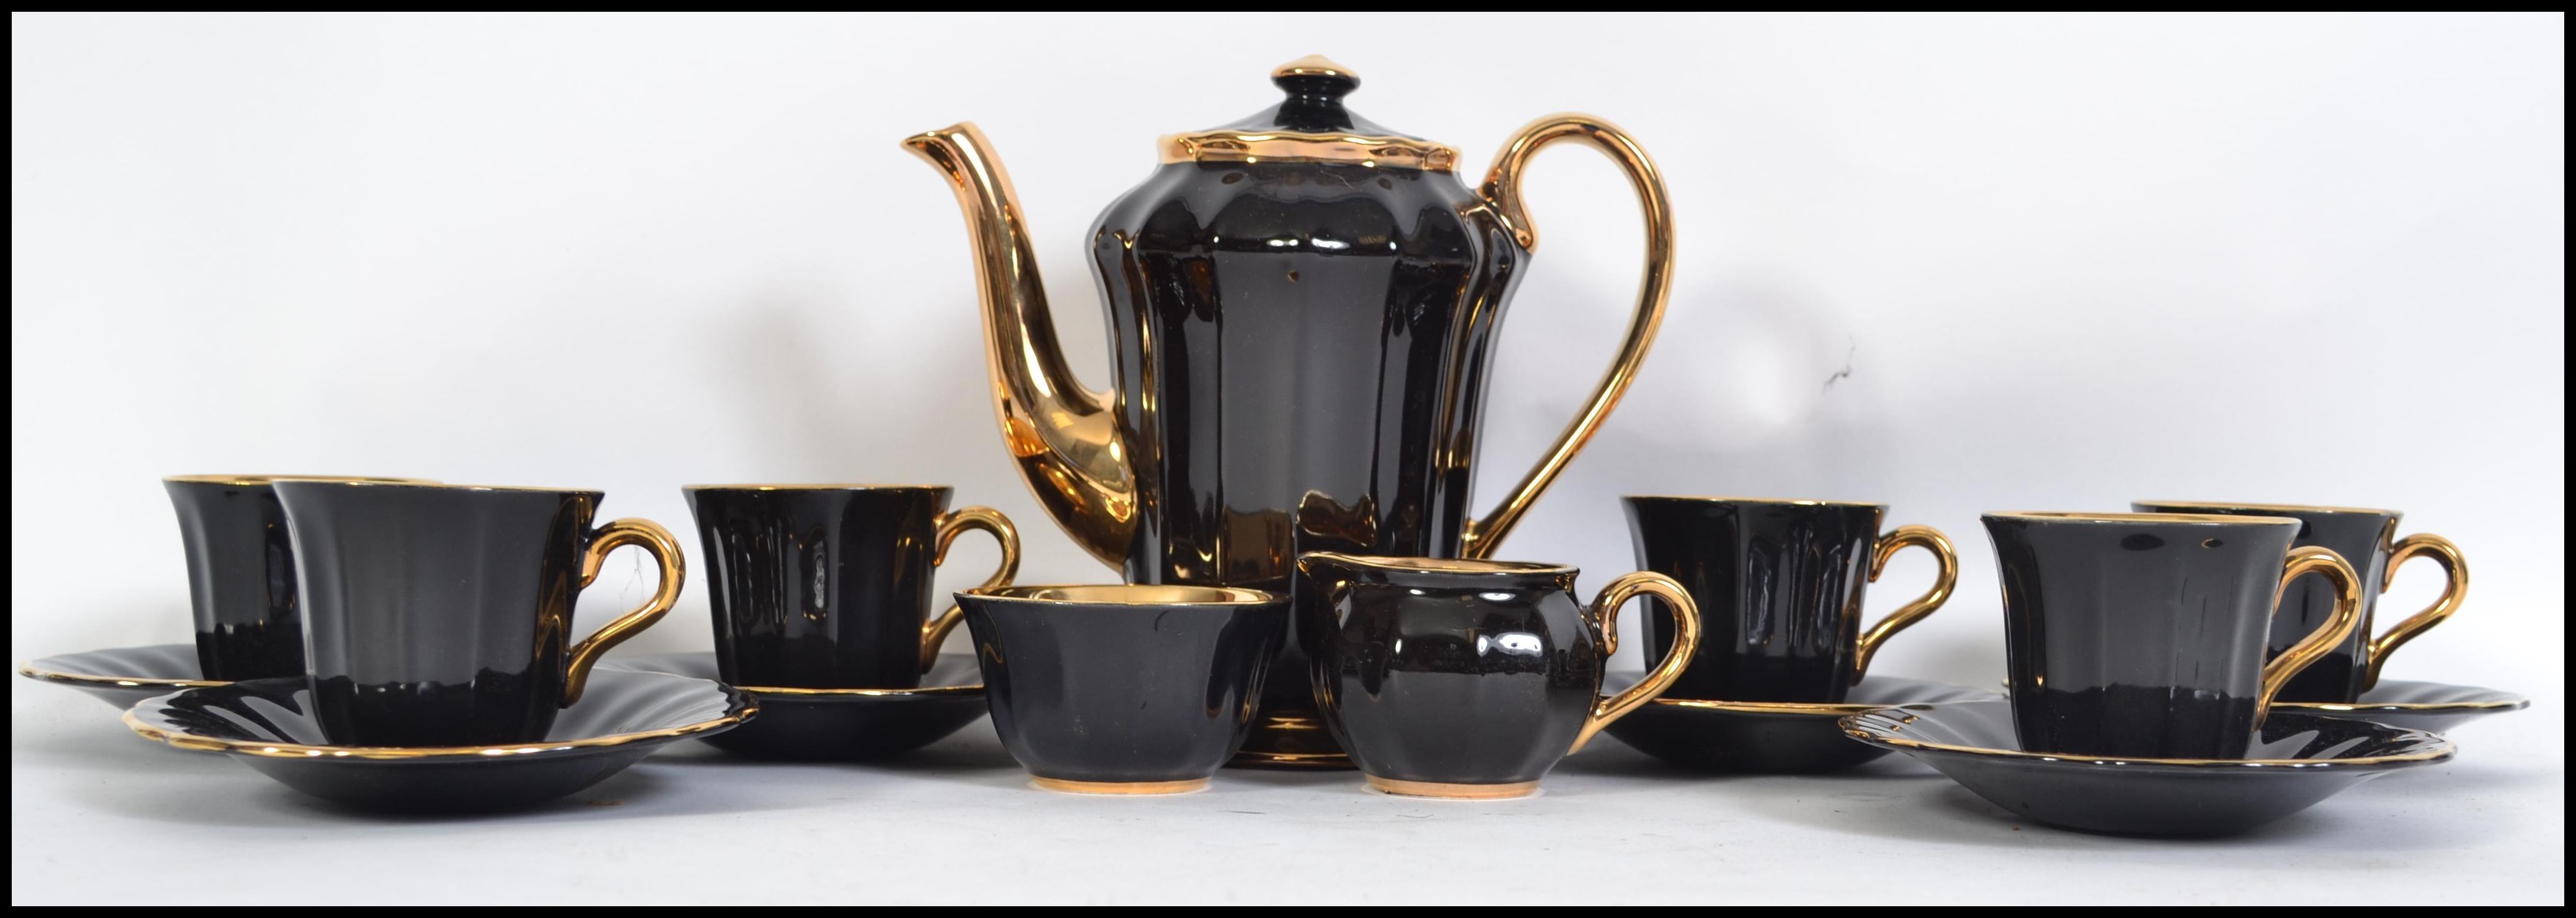 A vintage boxed 20th century coffee service by Wade, looks to be unused in the original box, black